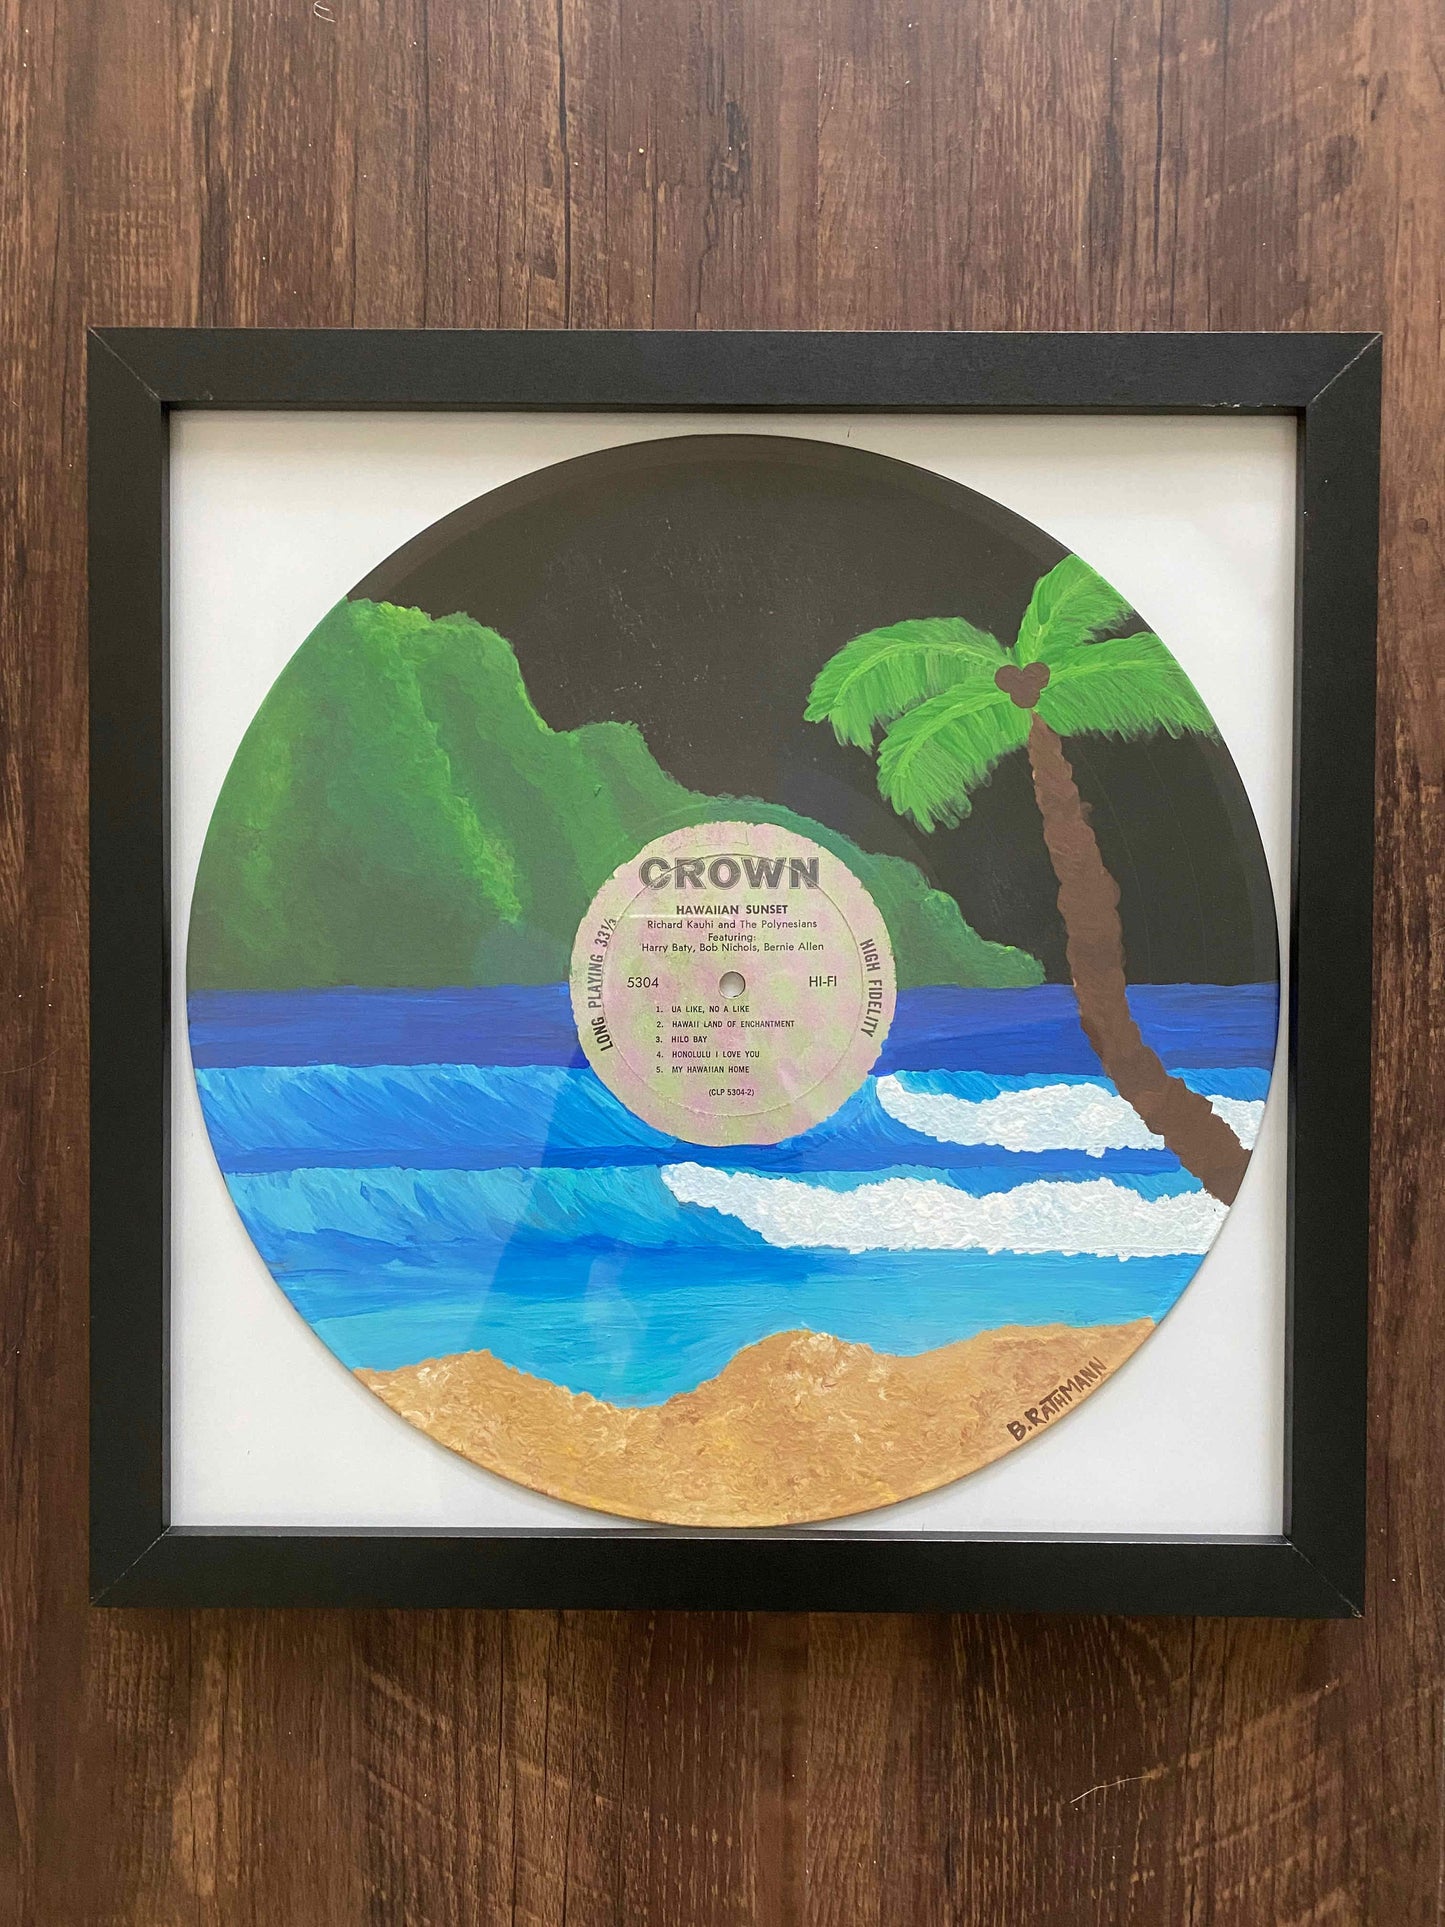 Hawaiian Sunset Record is an acrylic painting of a Hawaiian island on a thrifted record. This original painting is perfect for any space. This work was done on a repurposed vinyl record bought at a local thrift store.